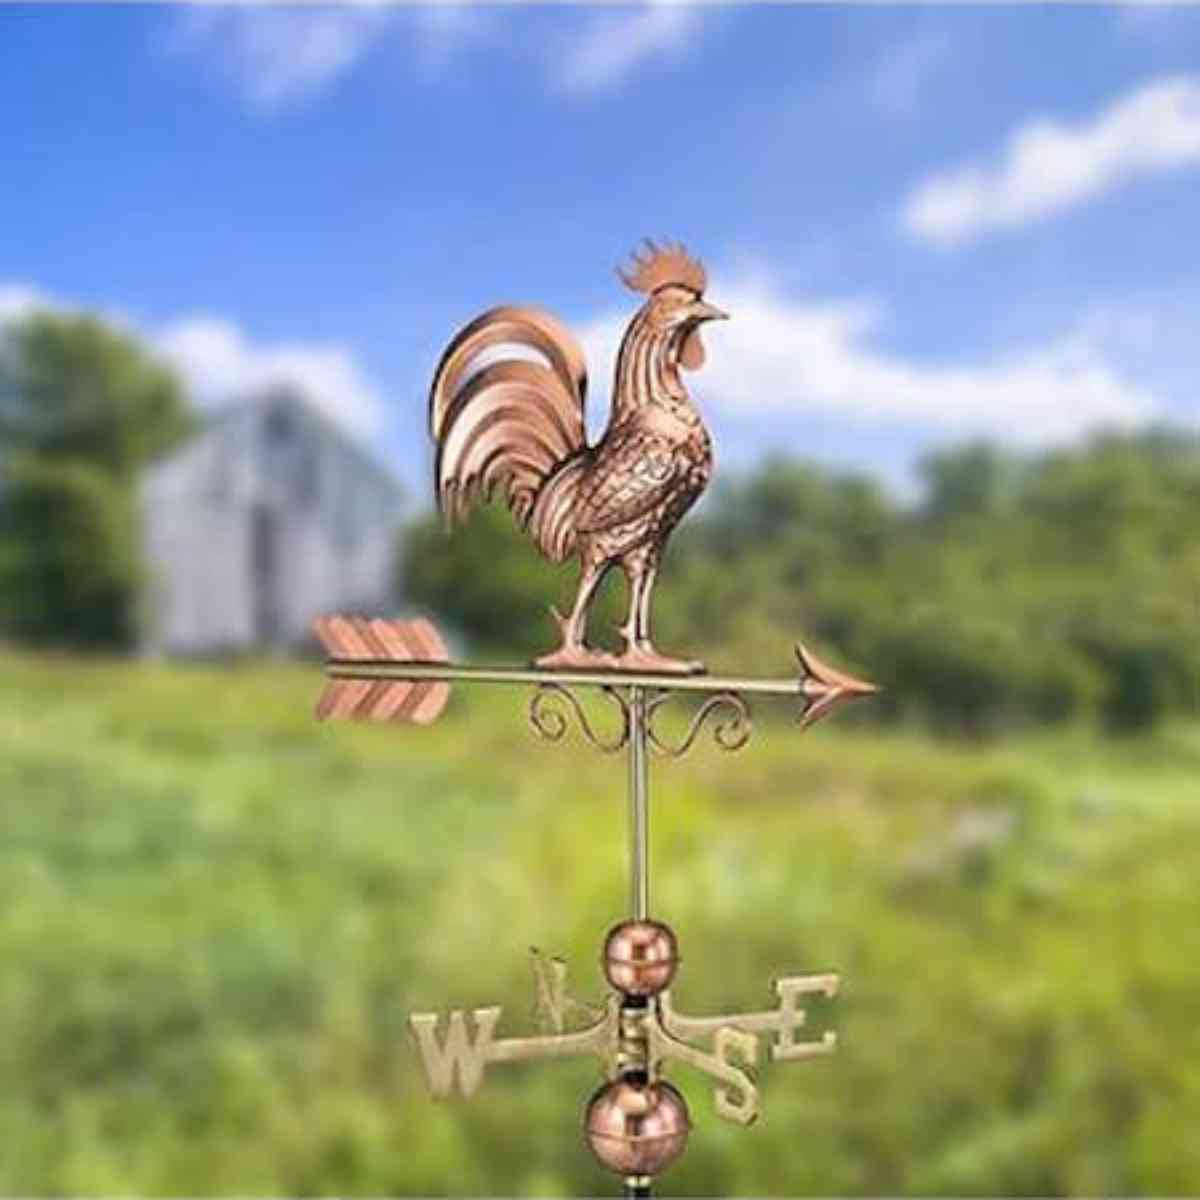 bantam rooster weathervane field picture